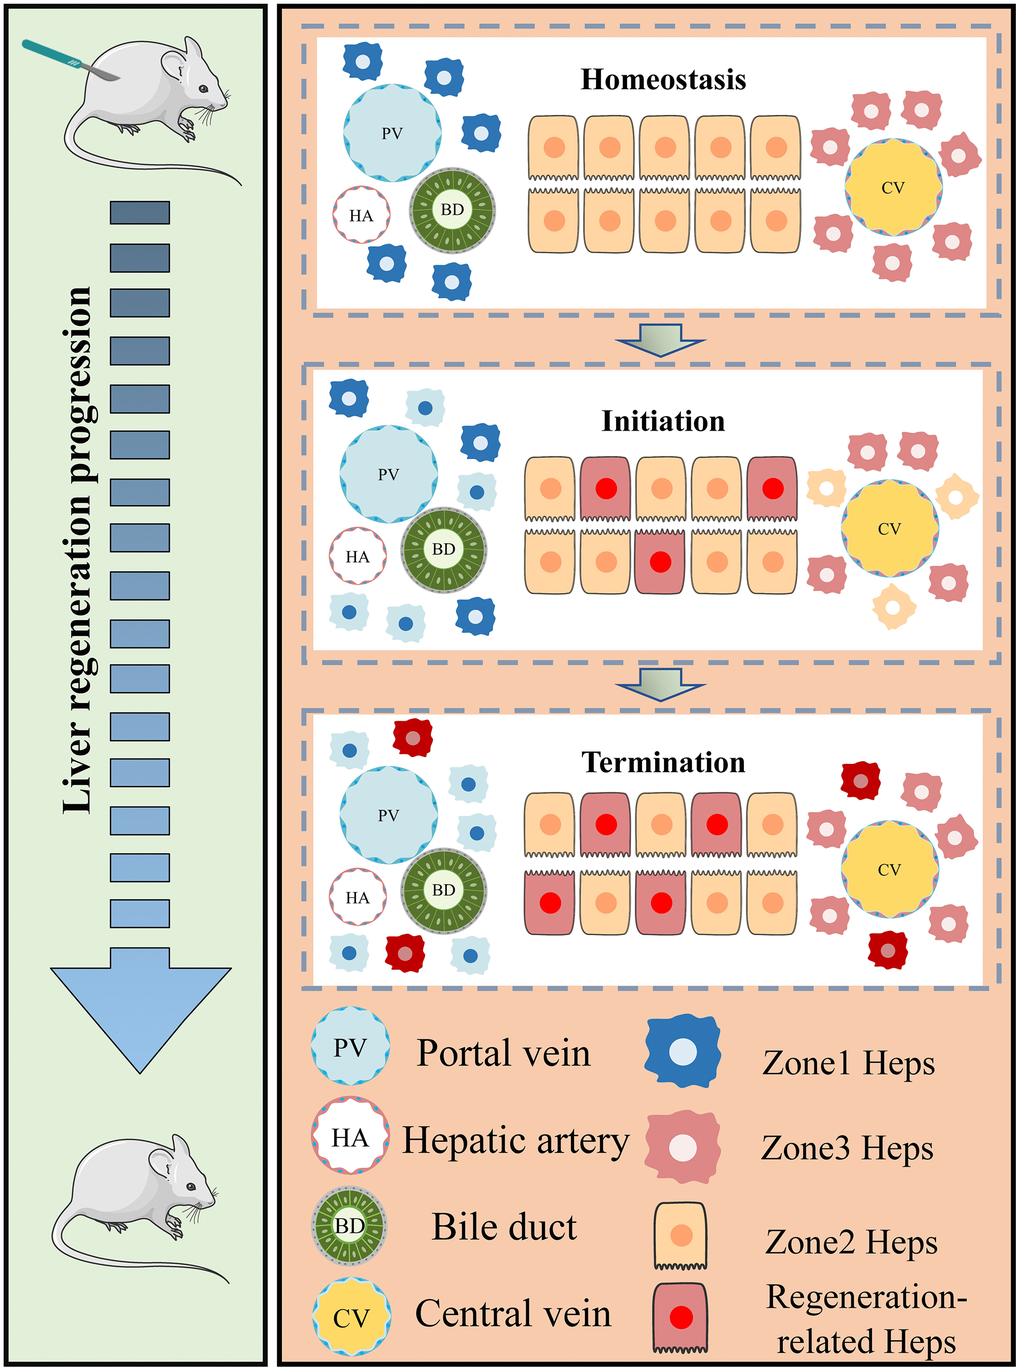 Regional characteristics of live regeneration-related hepatocytes during acute liver injury. The left panel of our study demonstrates the process of liver regeneration following PHx. The surgical resection of liver tissue triggers the rapid re-entry of remnant hepatocytes into the regeneration state. The right panel summarizes the zonal variation in regeneration-related hepatocytes during acute liver injury (AIL). Under homeostatic conditions, hepatocytes in different zones remain in a quiescent state. Portal vein (PV) and central vein (CV) hepatocytes are located at both ends of the hepatic lobules and exhibit distinct spatial gene expression patterns. However, during liver damage, newborn hepatocytes initiate in the midlobular regions before progressing towards the periportal and pericentral areas. At the same time, zonal differences in PV and CV hepatocyte gene expression decrease as hepatocytes respond to the regenerative challenge (hepatocytes with blue and yellow dim out). During the termination phase, newborn hepatocytes repopulate different regions, leading to the recovery of liver function.